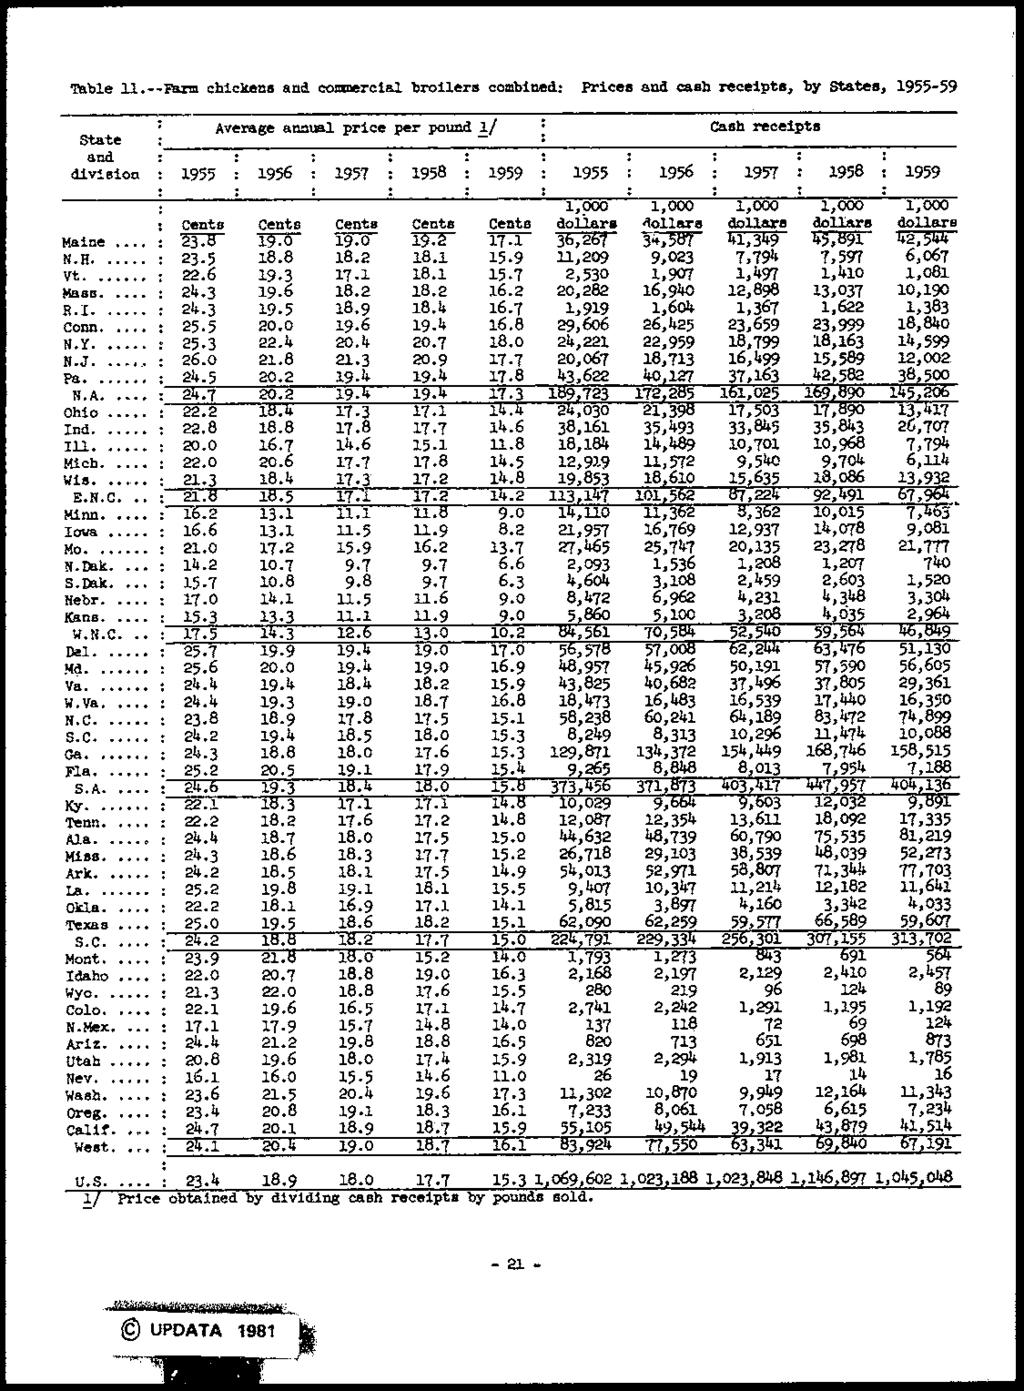 Table ll.--farm chickens and col!lllerc1al brouers combined: Prices and cash receipts, b.y states. 1955-59 Average annual price per JlOund '!:./ cash receipts state and division 1955 1956 1957 1958 1959 1955 1956 1957 1958 1959 1.